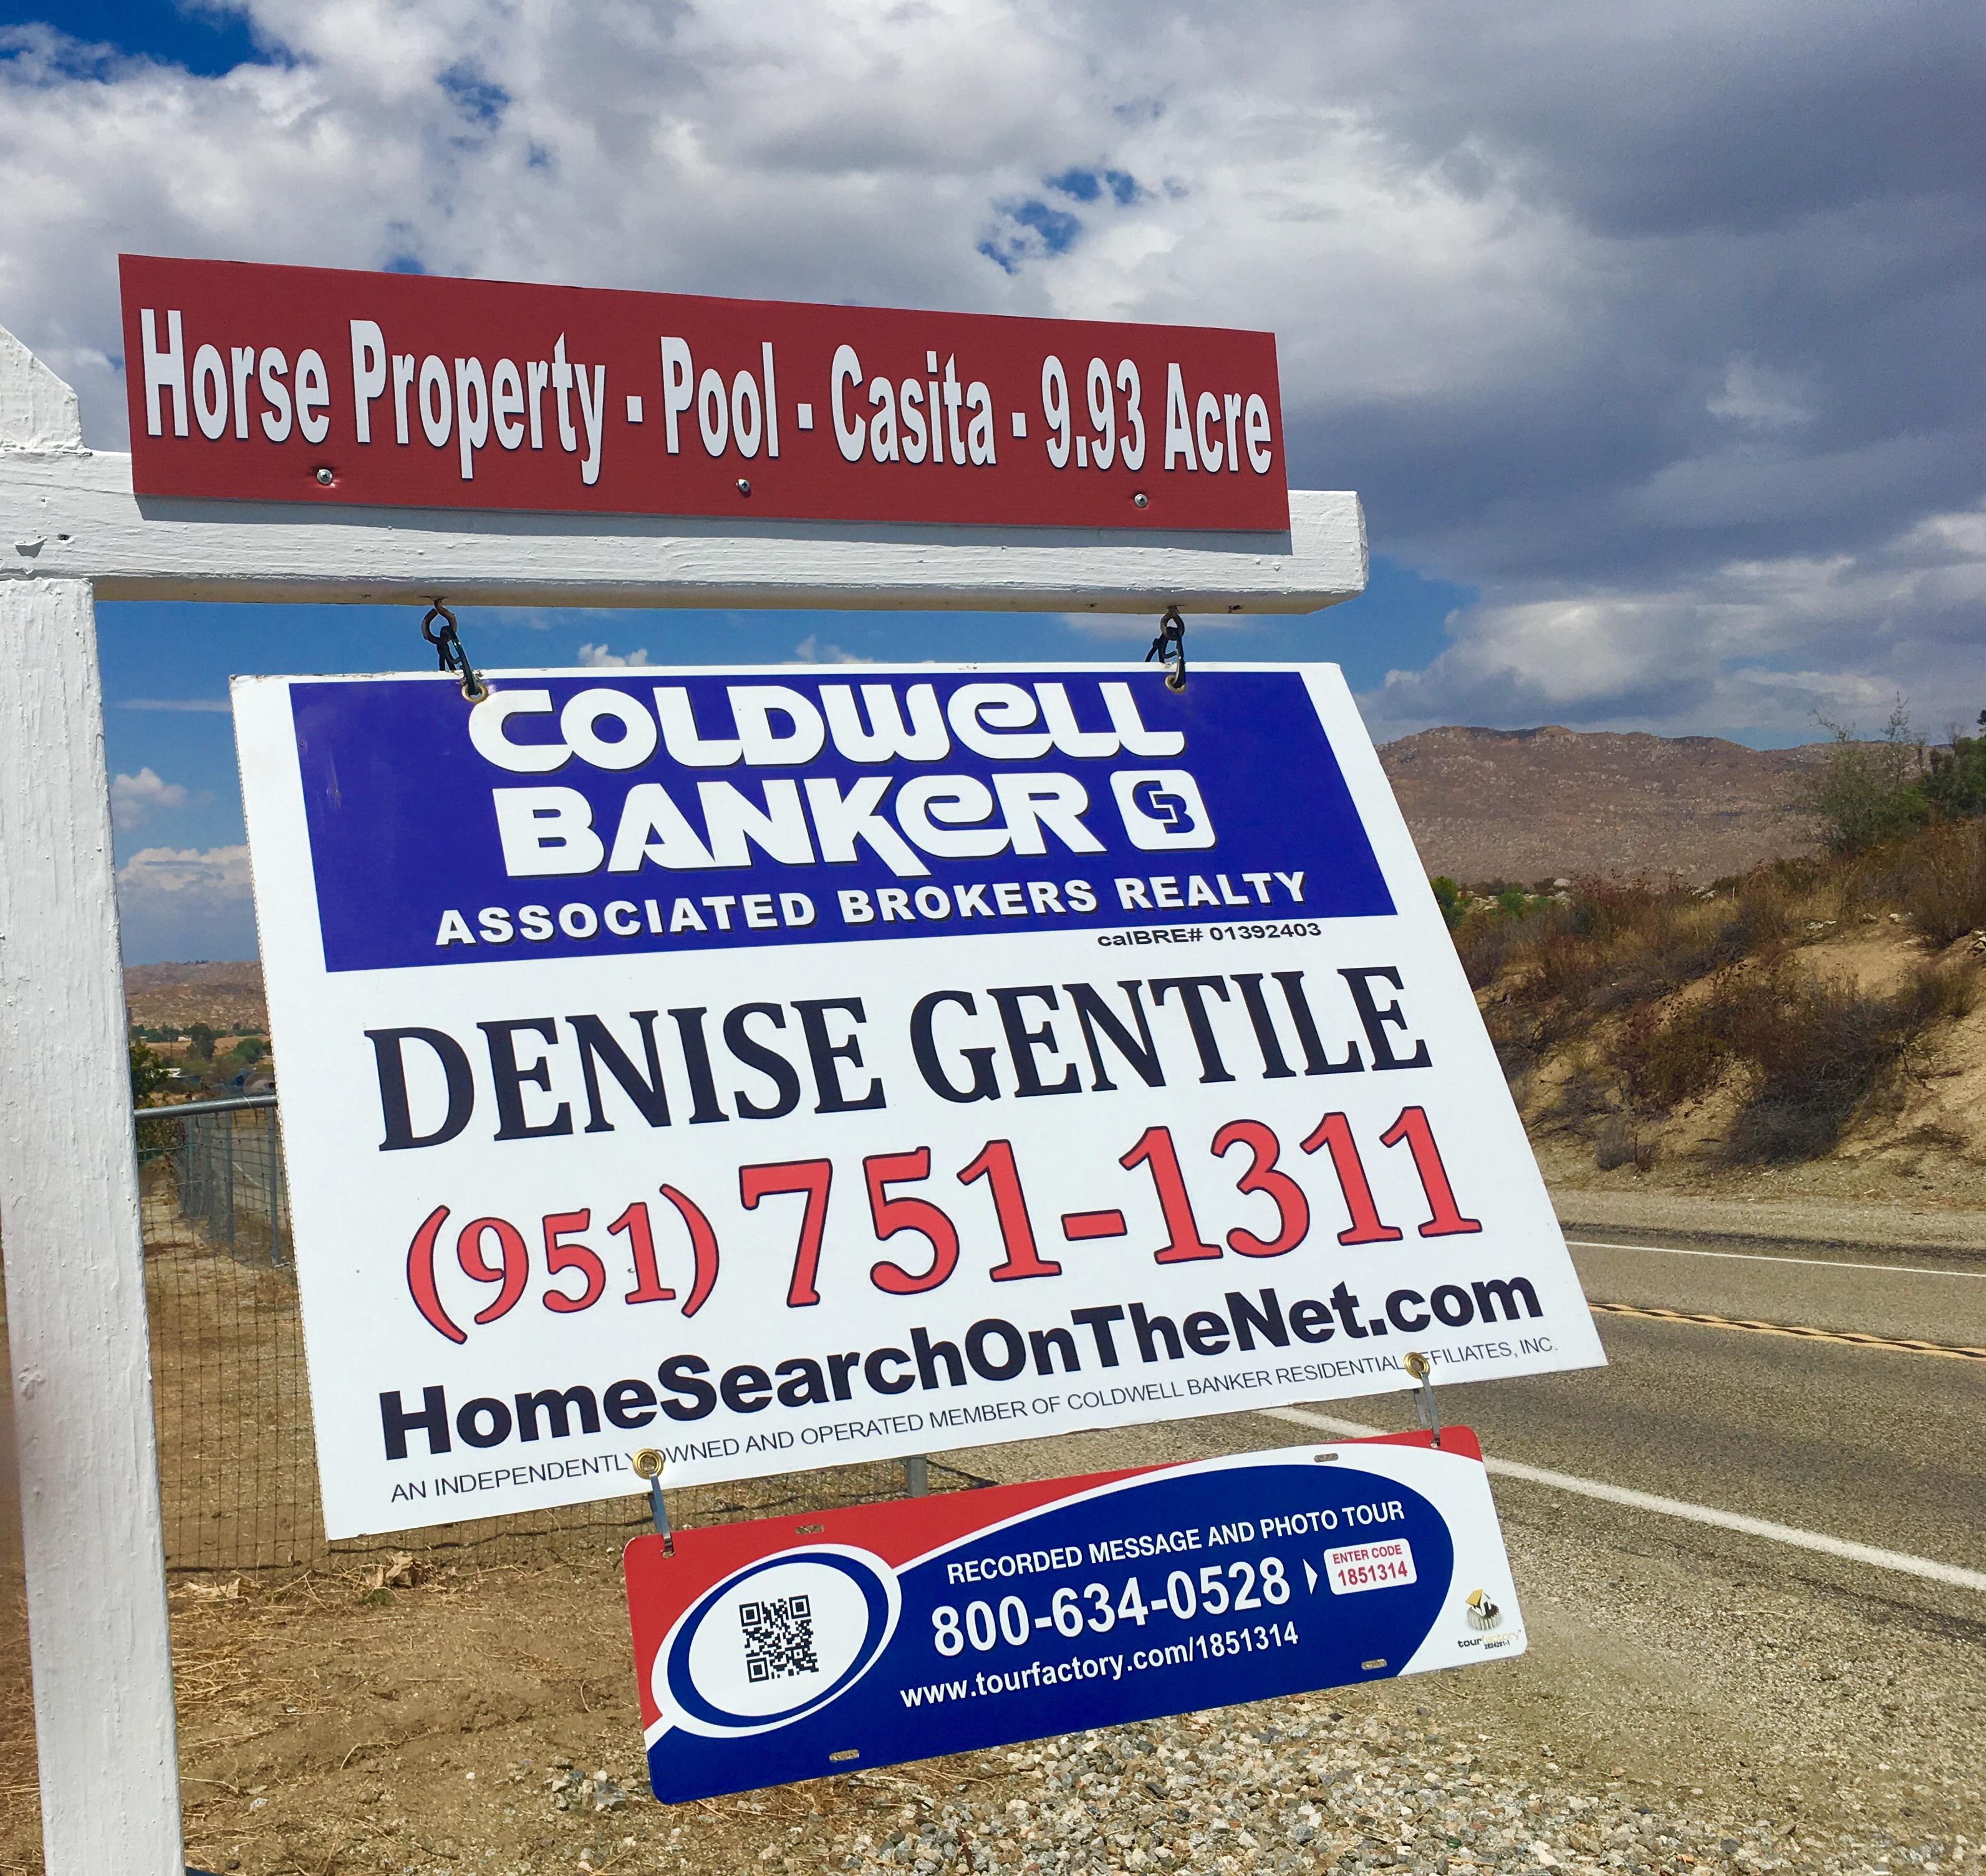 Ranch Horse Property and Pool Home Estate with Casita for Sale   32375 Sage Rd. Hemet, CA 92544 Call Denise 951-751-1311 for more details, or to schedule a showing. This awesome property won't last long. Almost 10 acres, and stunning views. A must see!